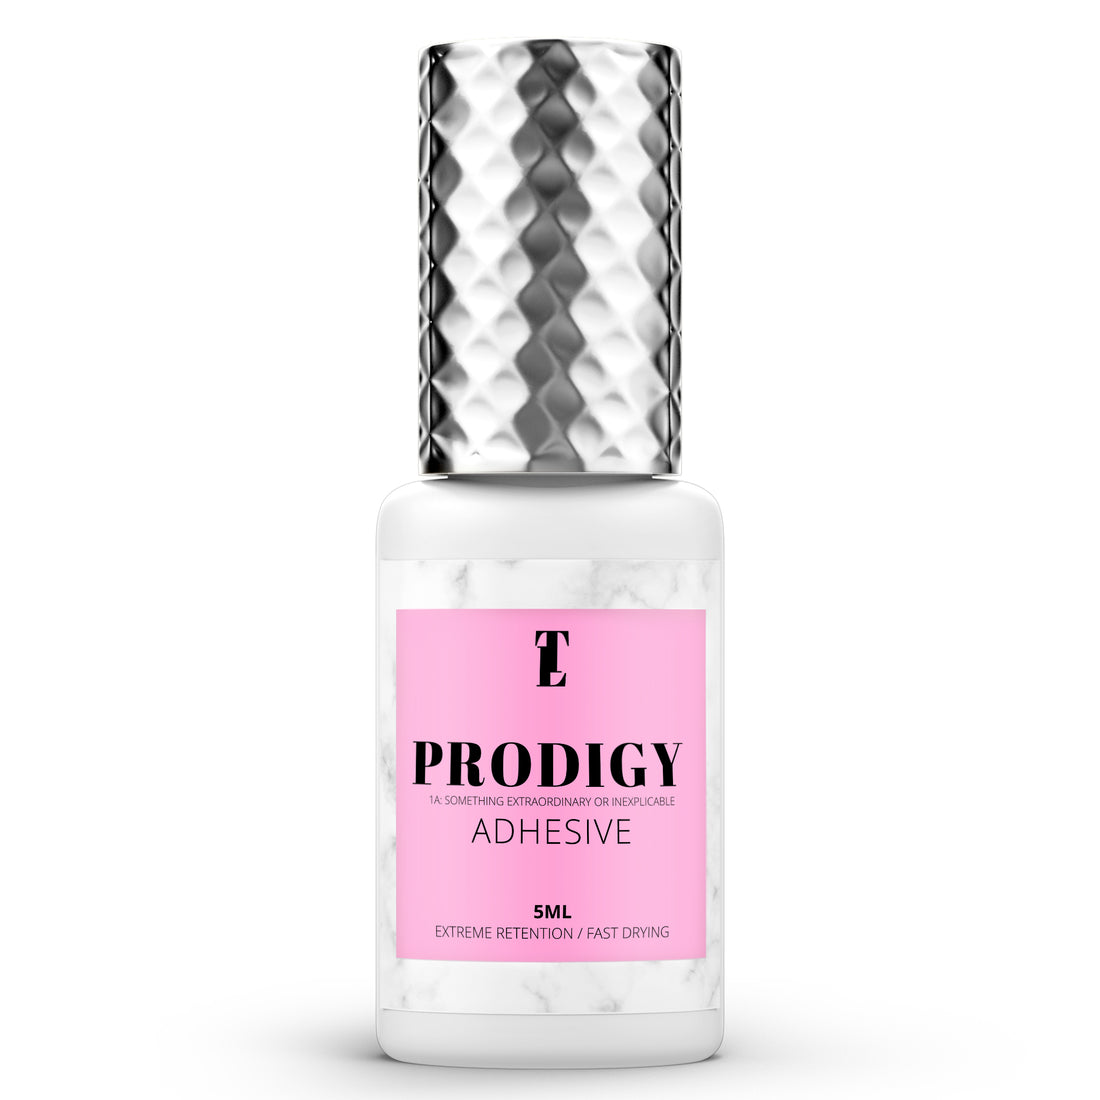 "The Power of Prodigy Lash Extension Adhesive: Fast-Drying, Formaldehyde-Free, and Perfect for Sensitive Clients"